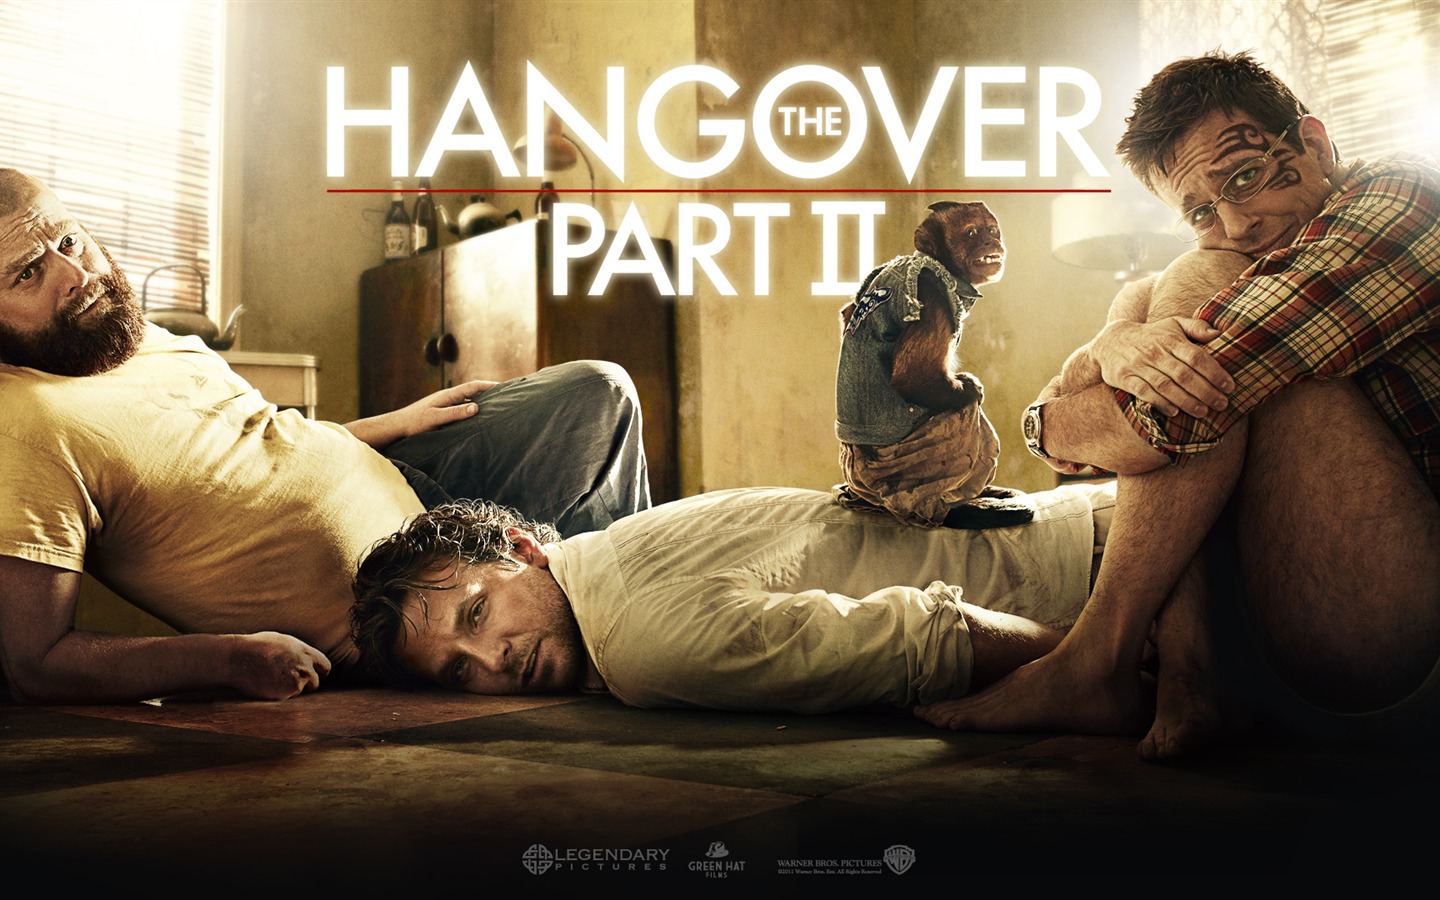 The Hangover část II tapety #9 - 1440x900